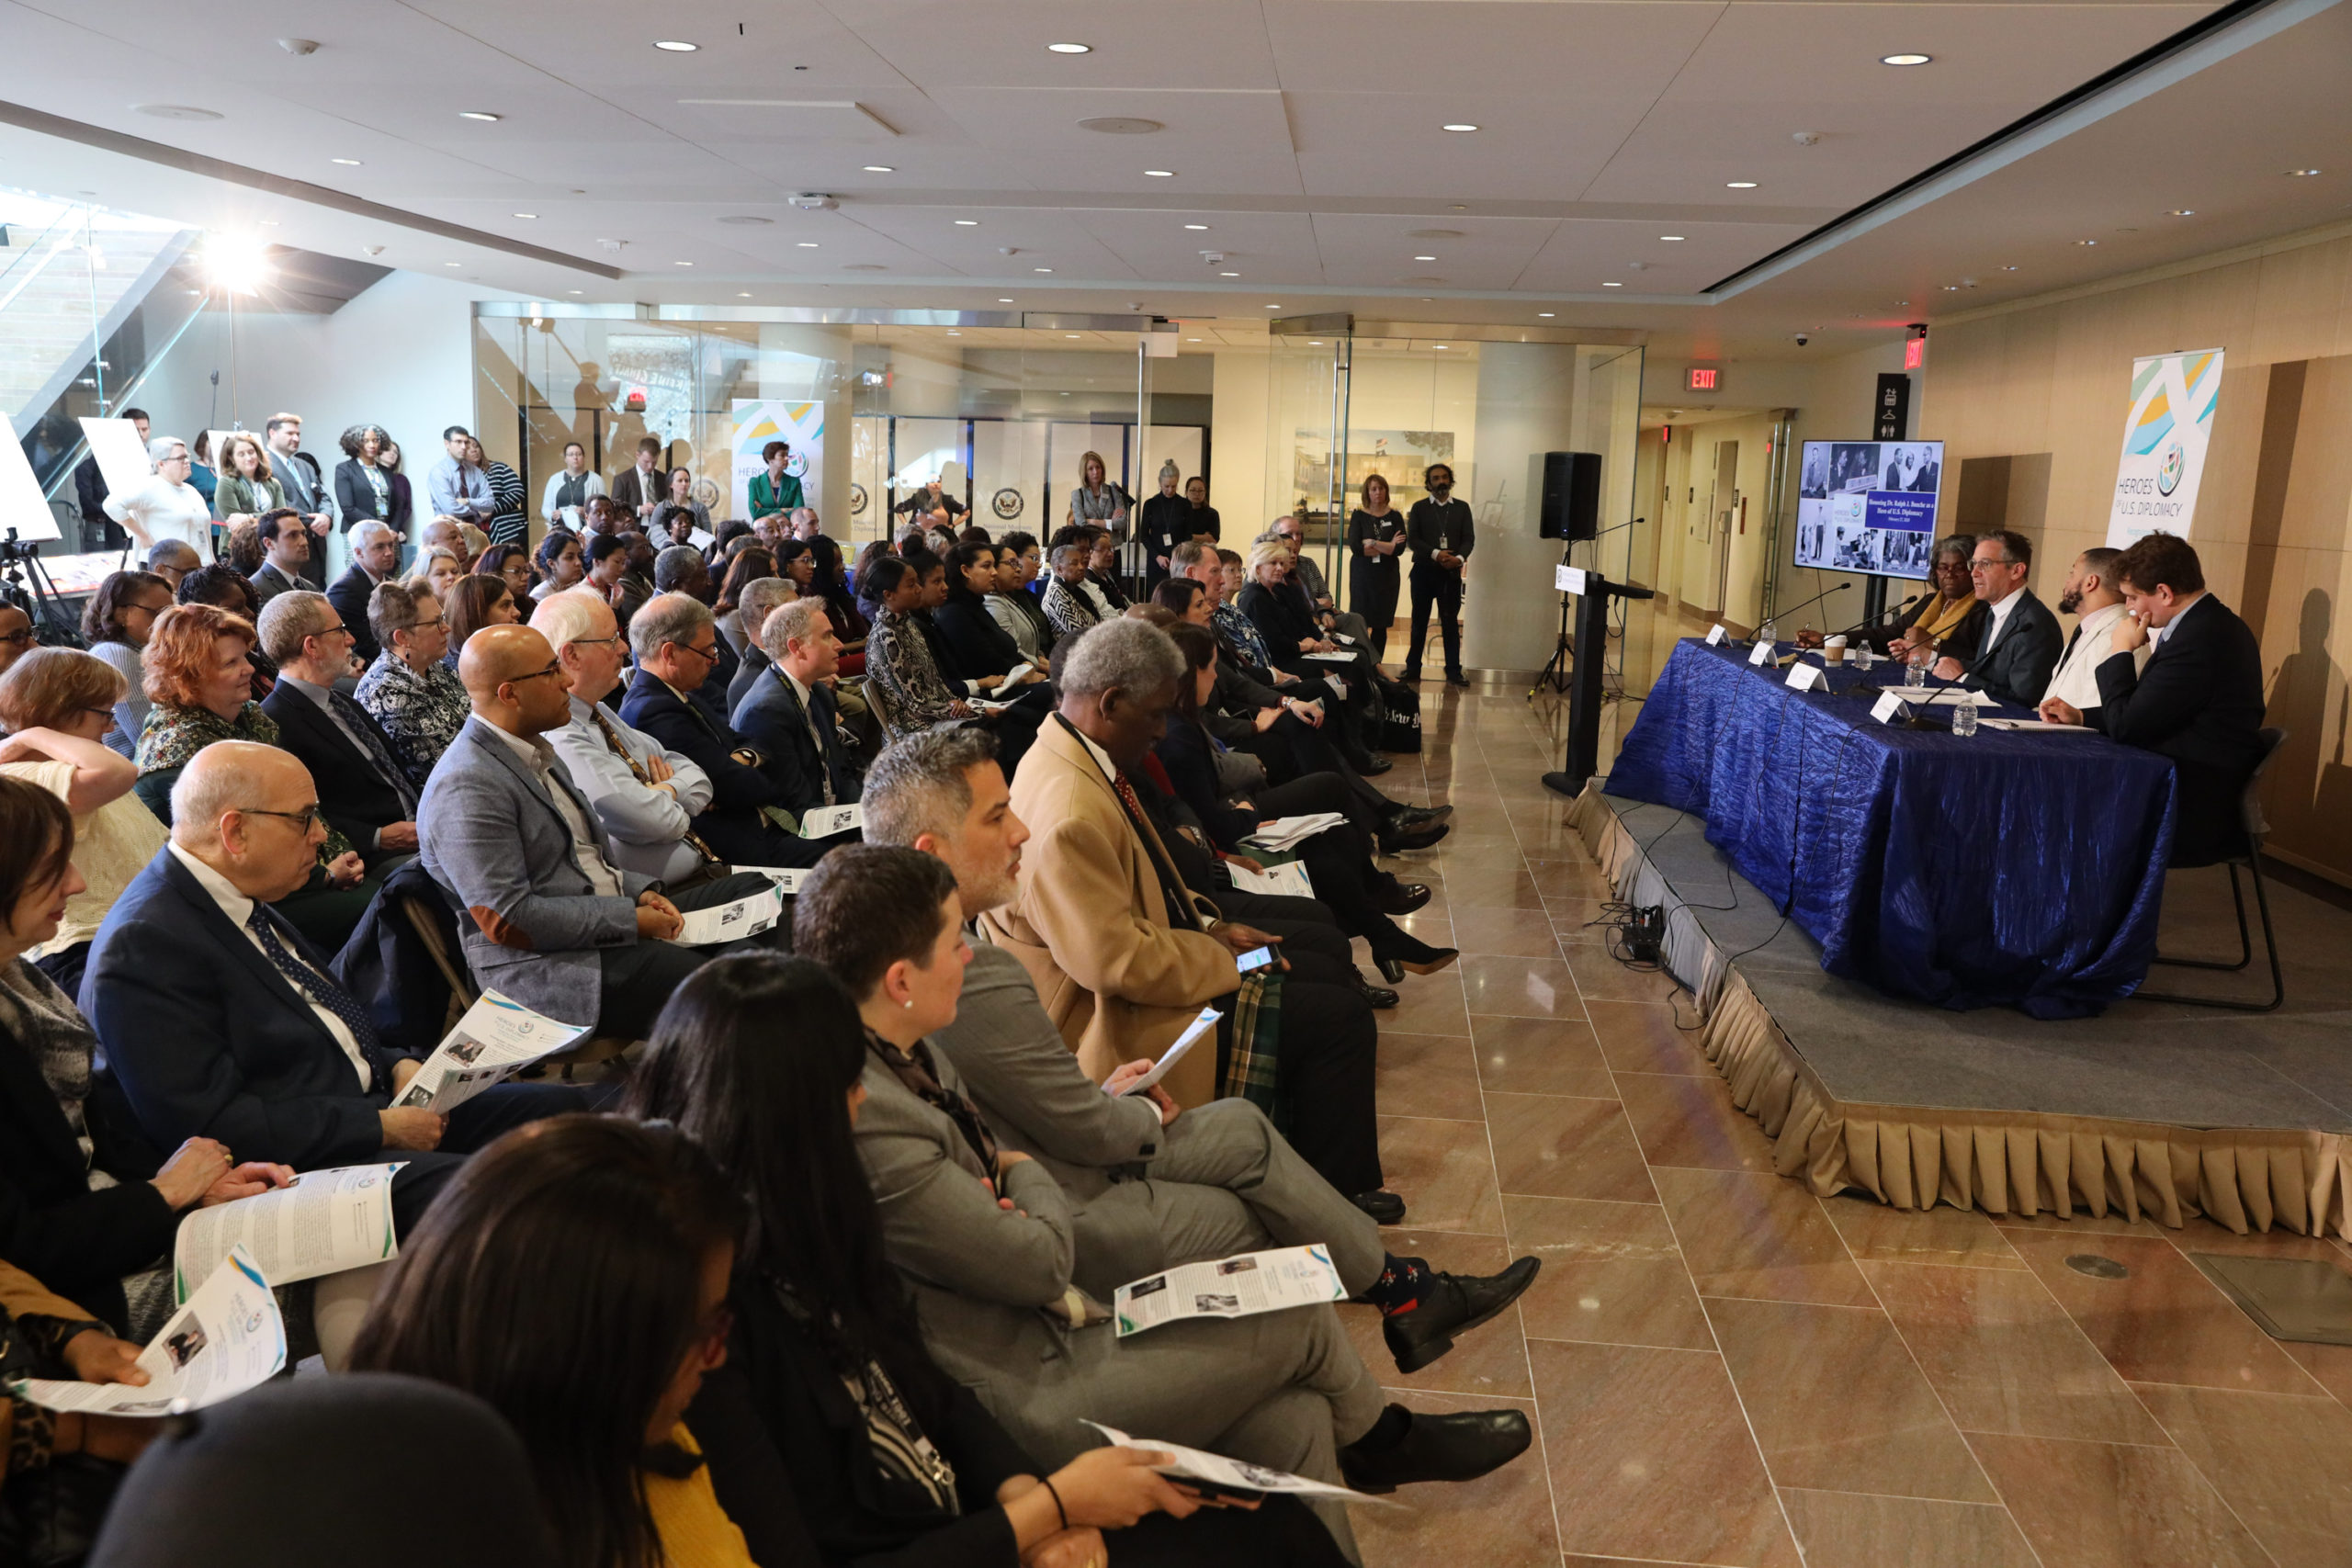 Audience members and panelists at the Heroes of U.S. Diplomacy program at the National Museum of American Diplomacy.